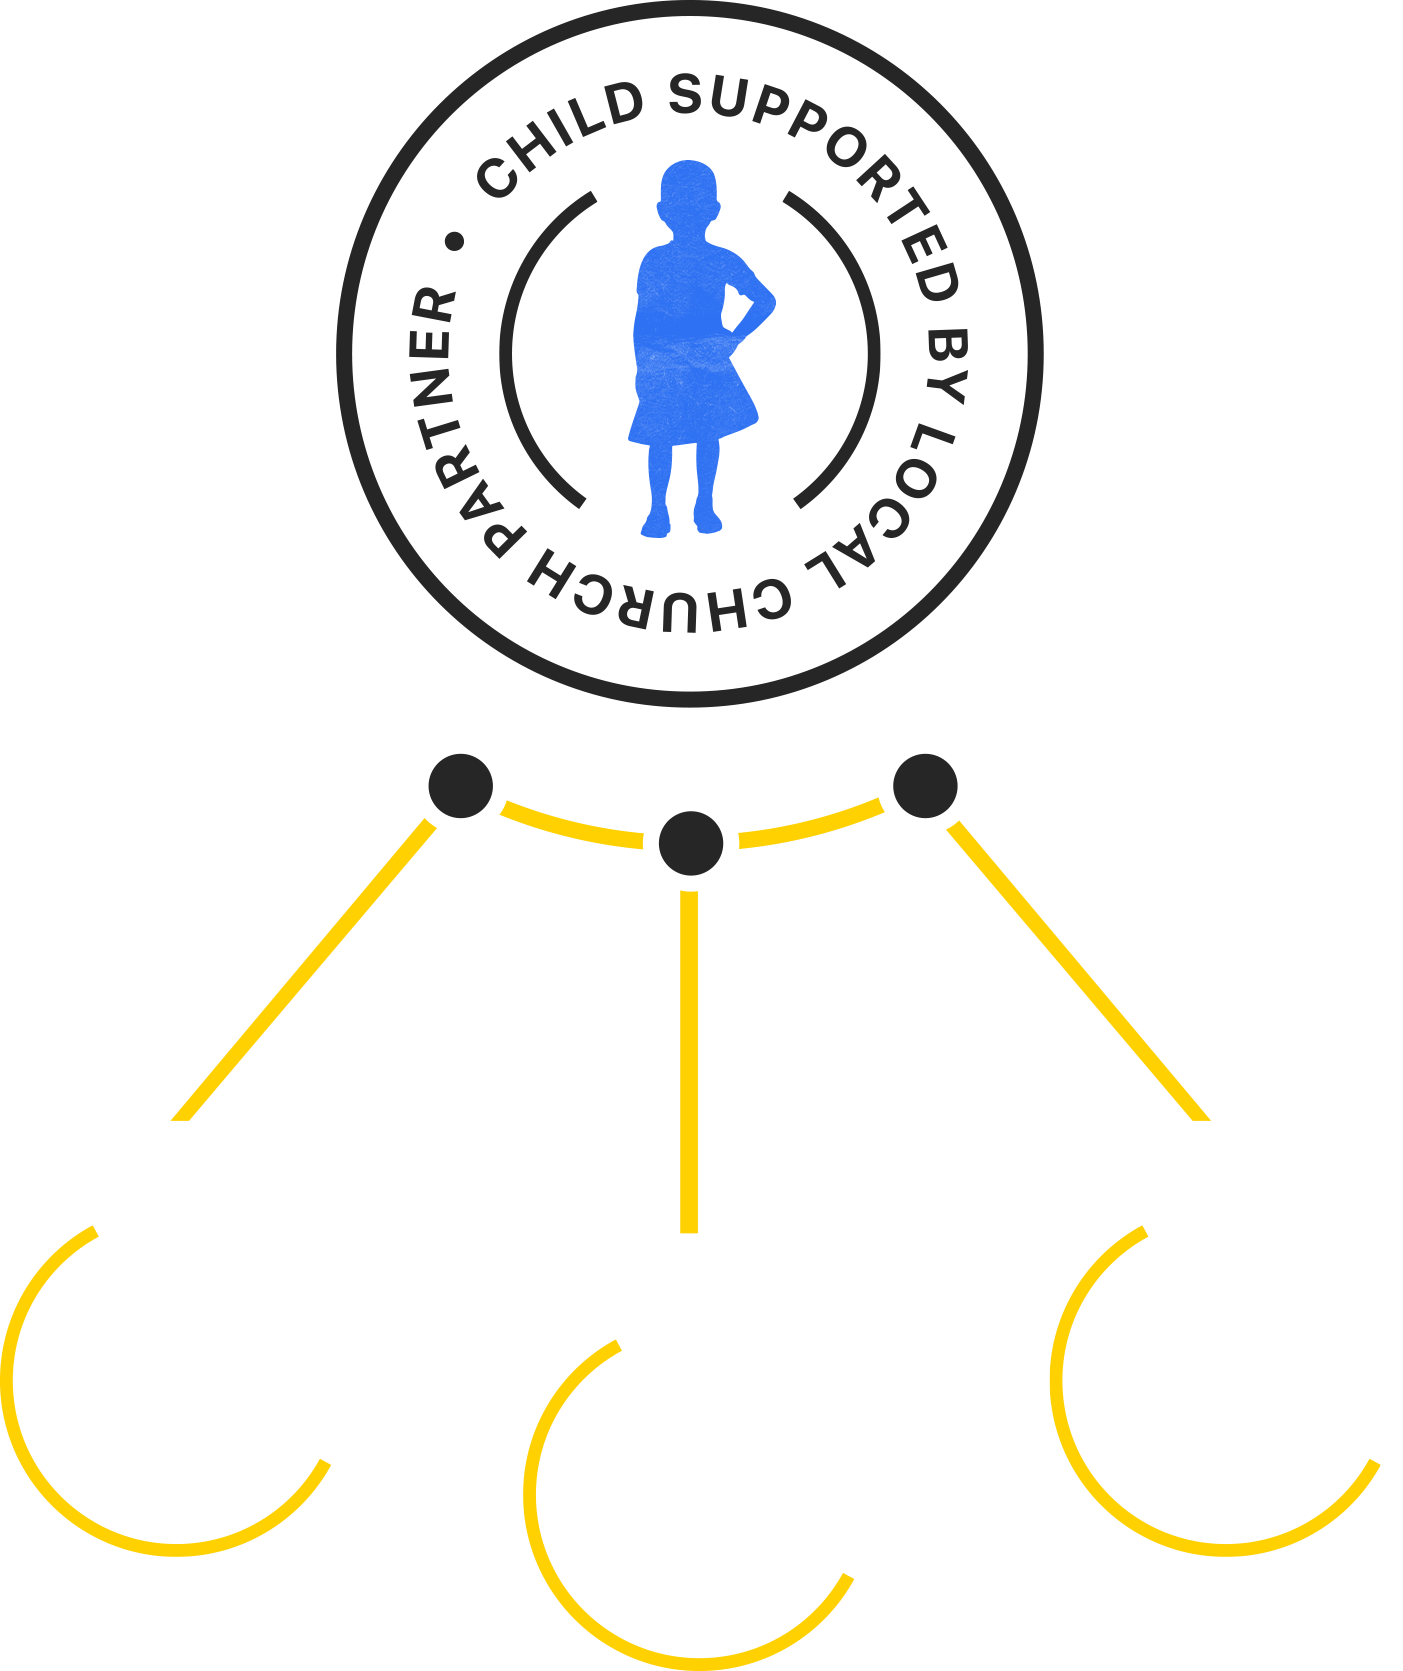 How it works diagram - one child, one church, three sponsors